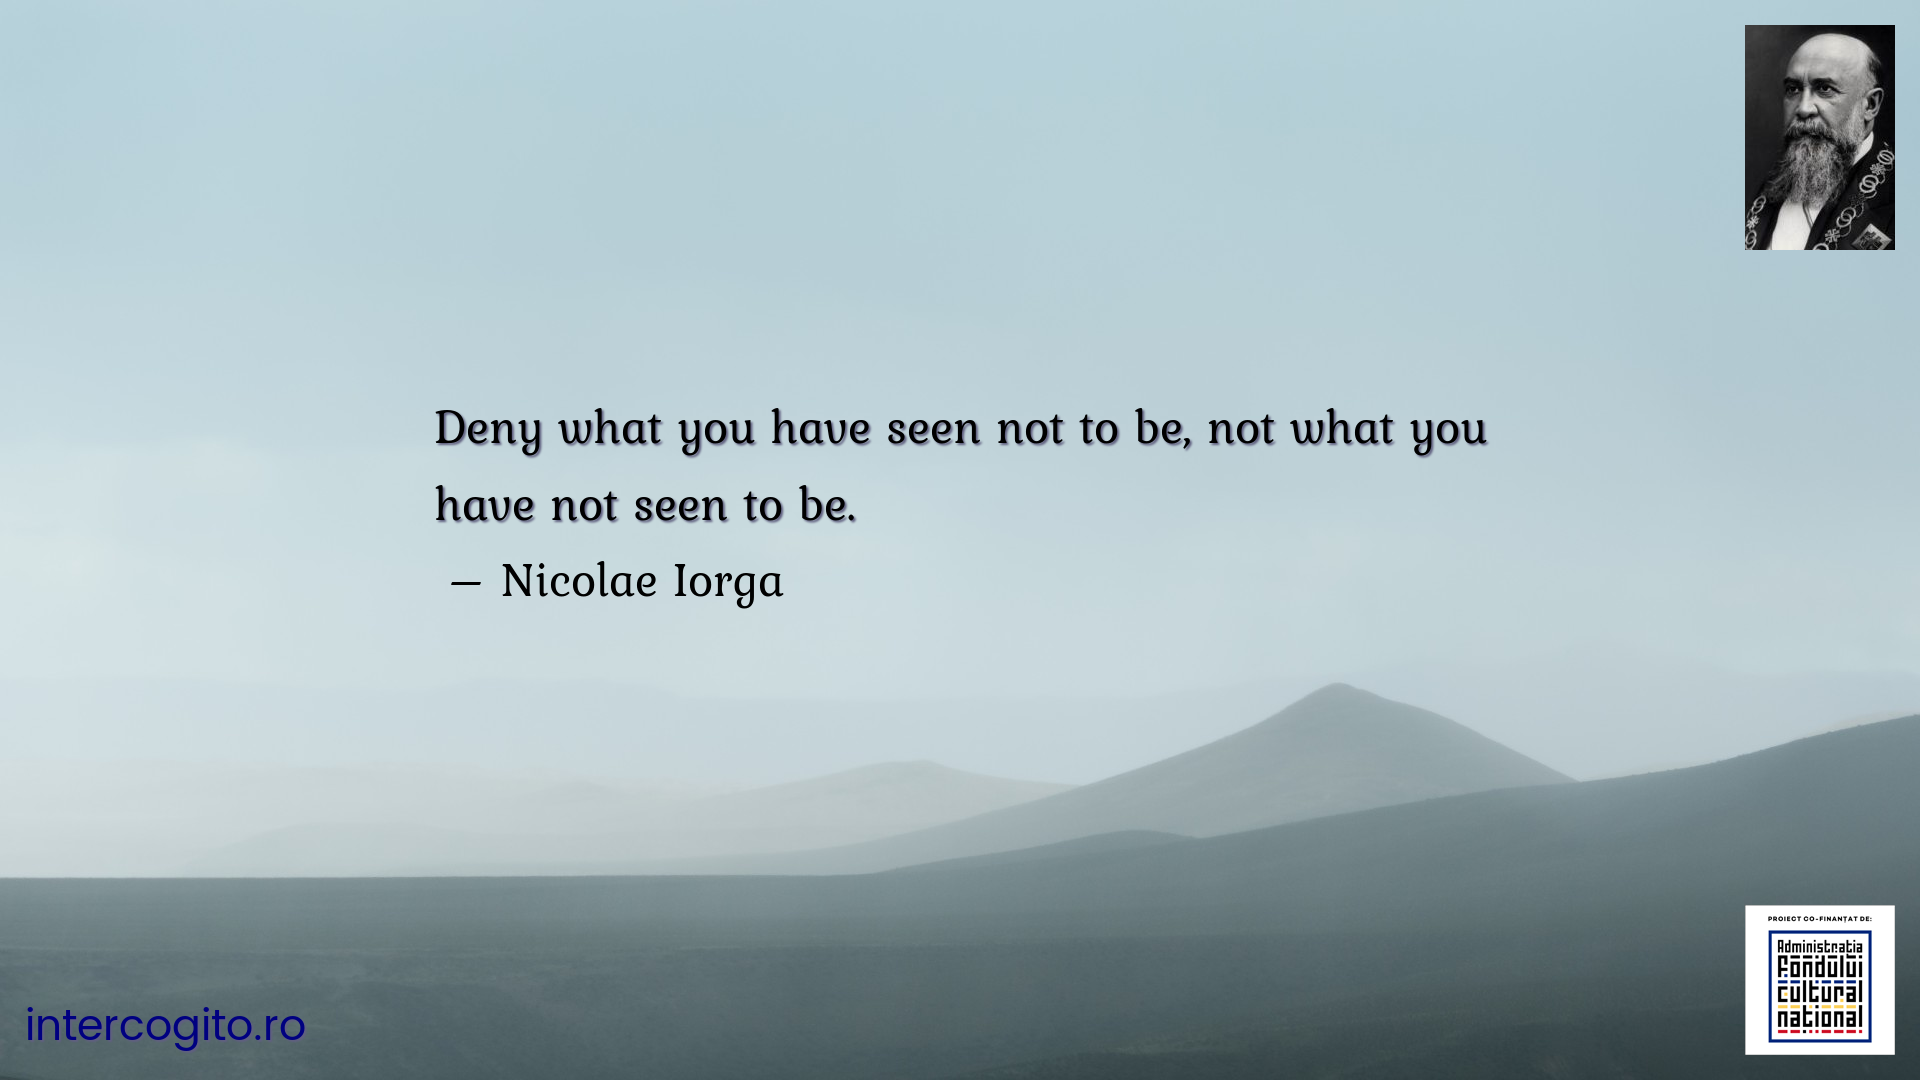 Deny what you have seen not to be, not what you have not seen to be.